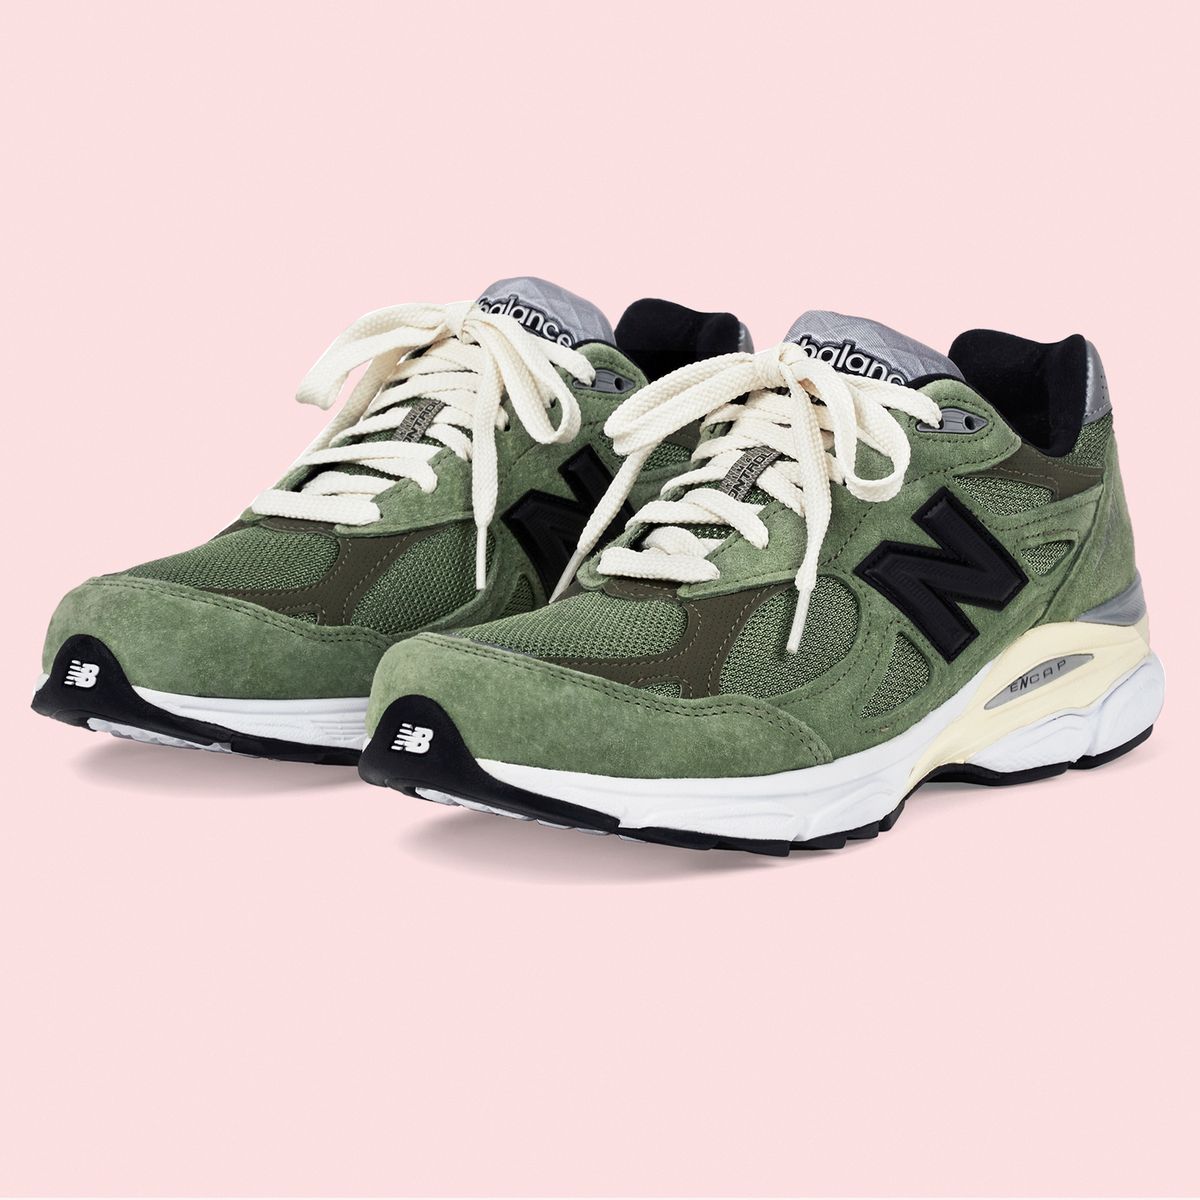 querido vacunación juguete JJJJound x New Balance 990v3 'Olive' Release Date, Price, and Where to Buy